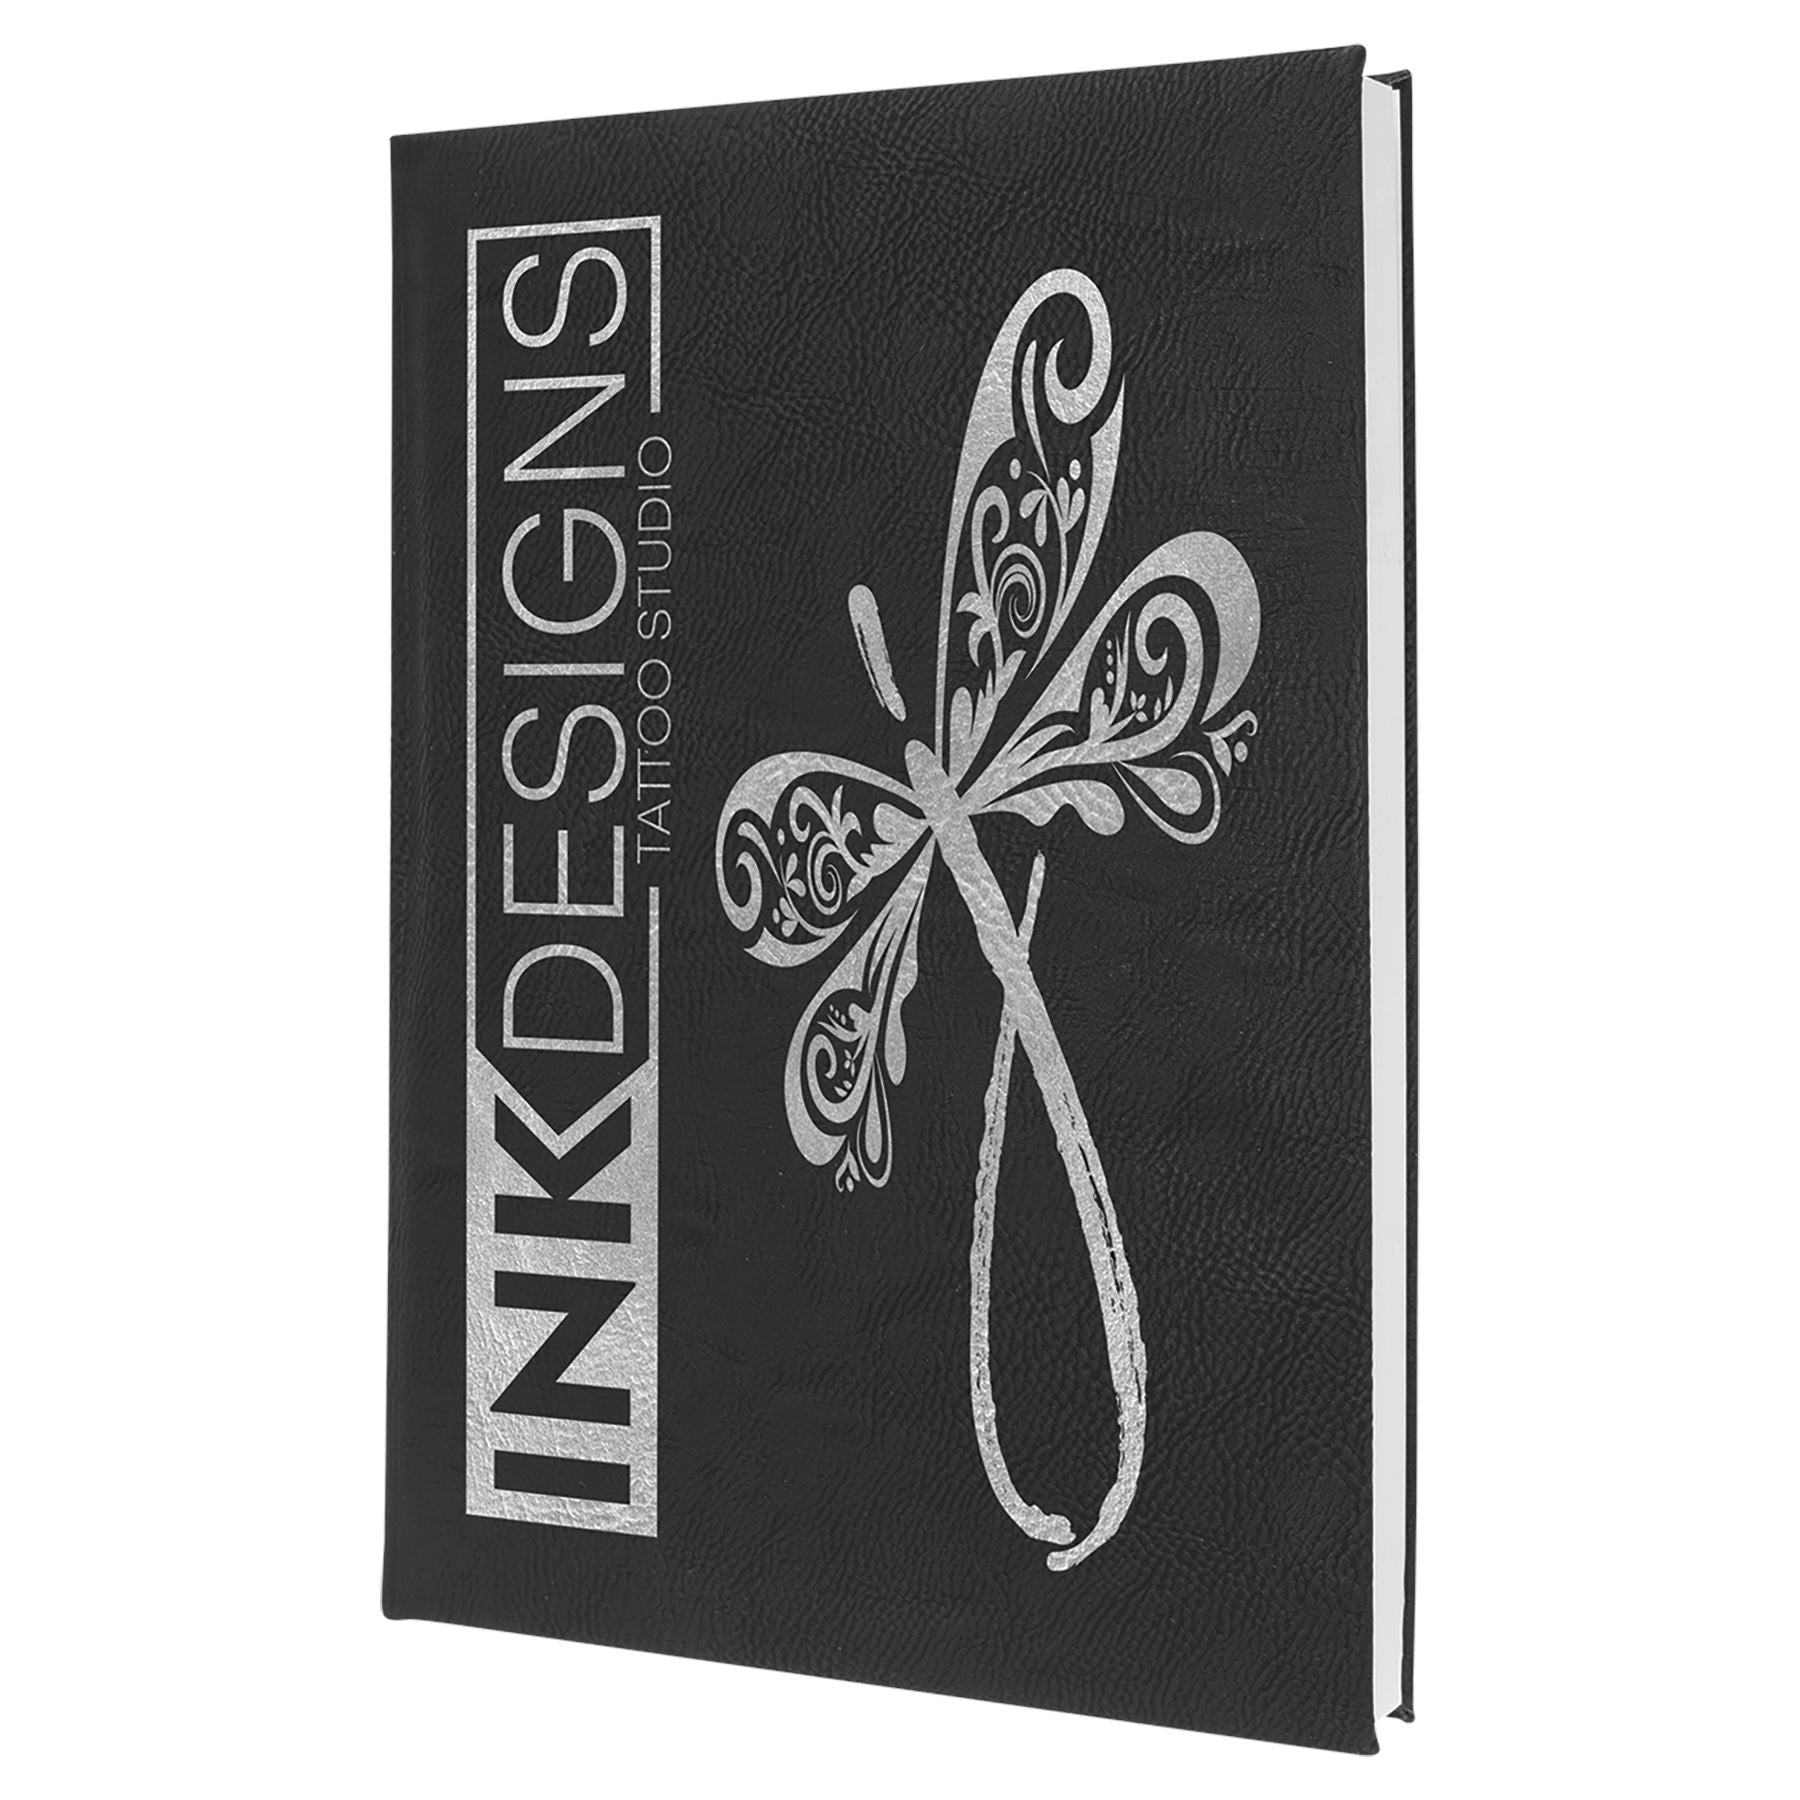 Sketch Book-Unlined Paper, 7" x 9 3/4" Laserable Leatherette, Laser Engraved Sketch Book Craftworks NW Black/Silver Front Only Small